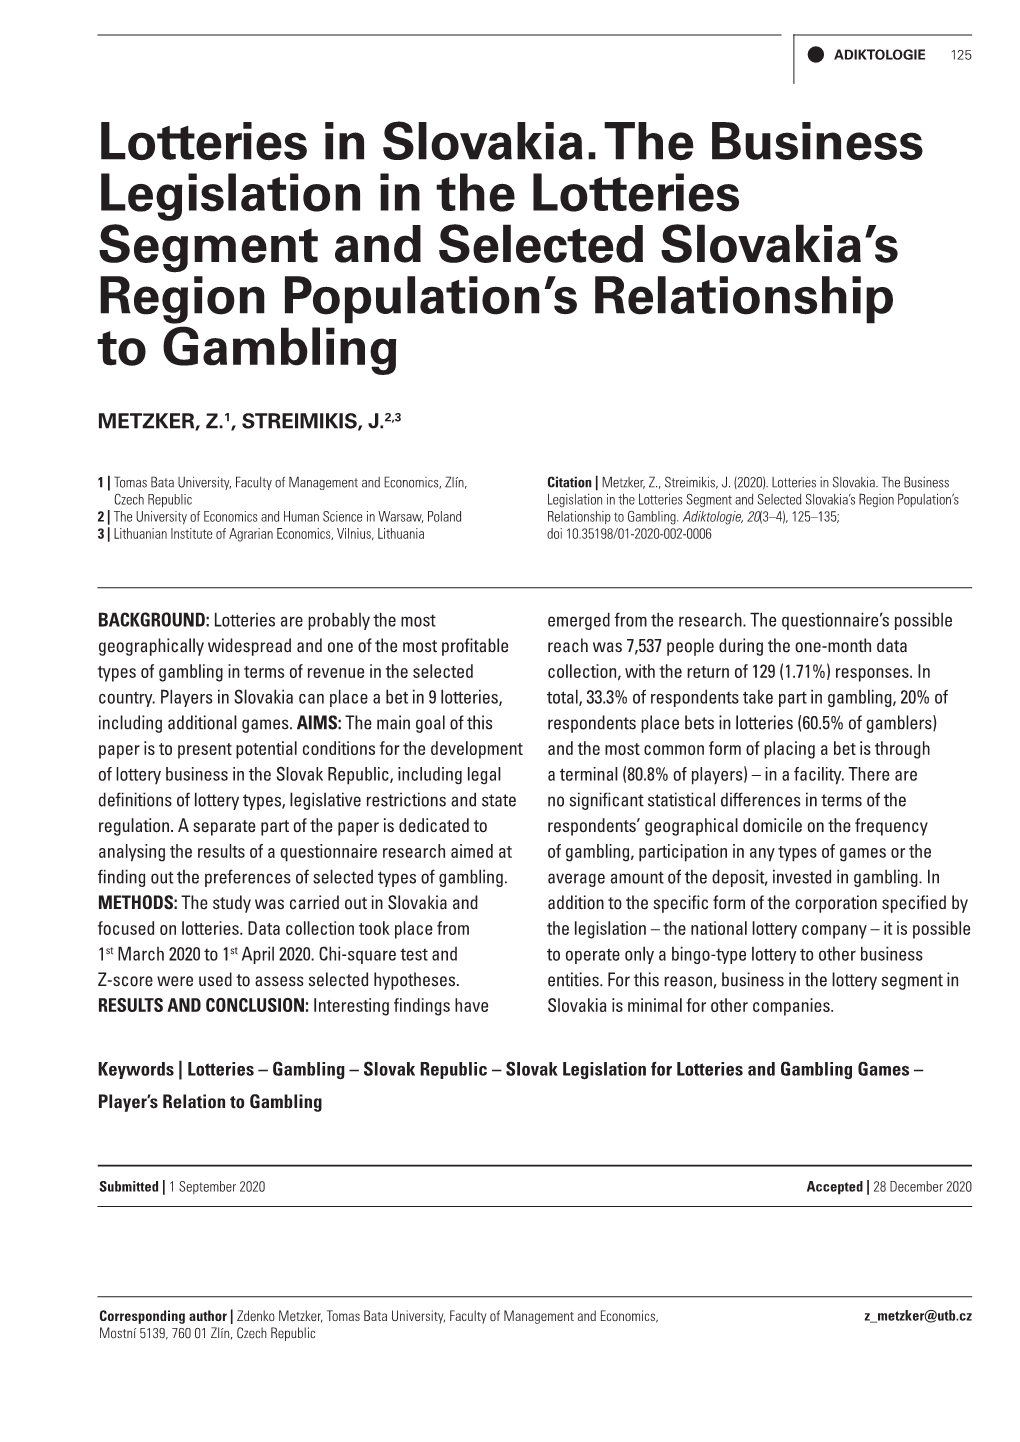 Lotteries in Slovakia. the Business Legislation in the Lotteries Segment and Selected Slovakia’S Region Population’S Relationship to Gambling